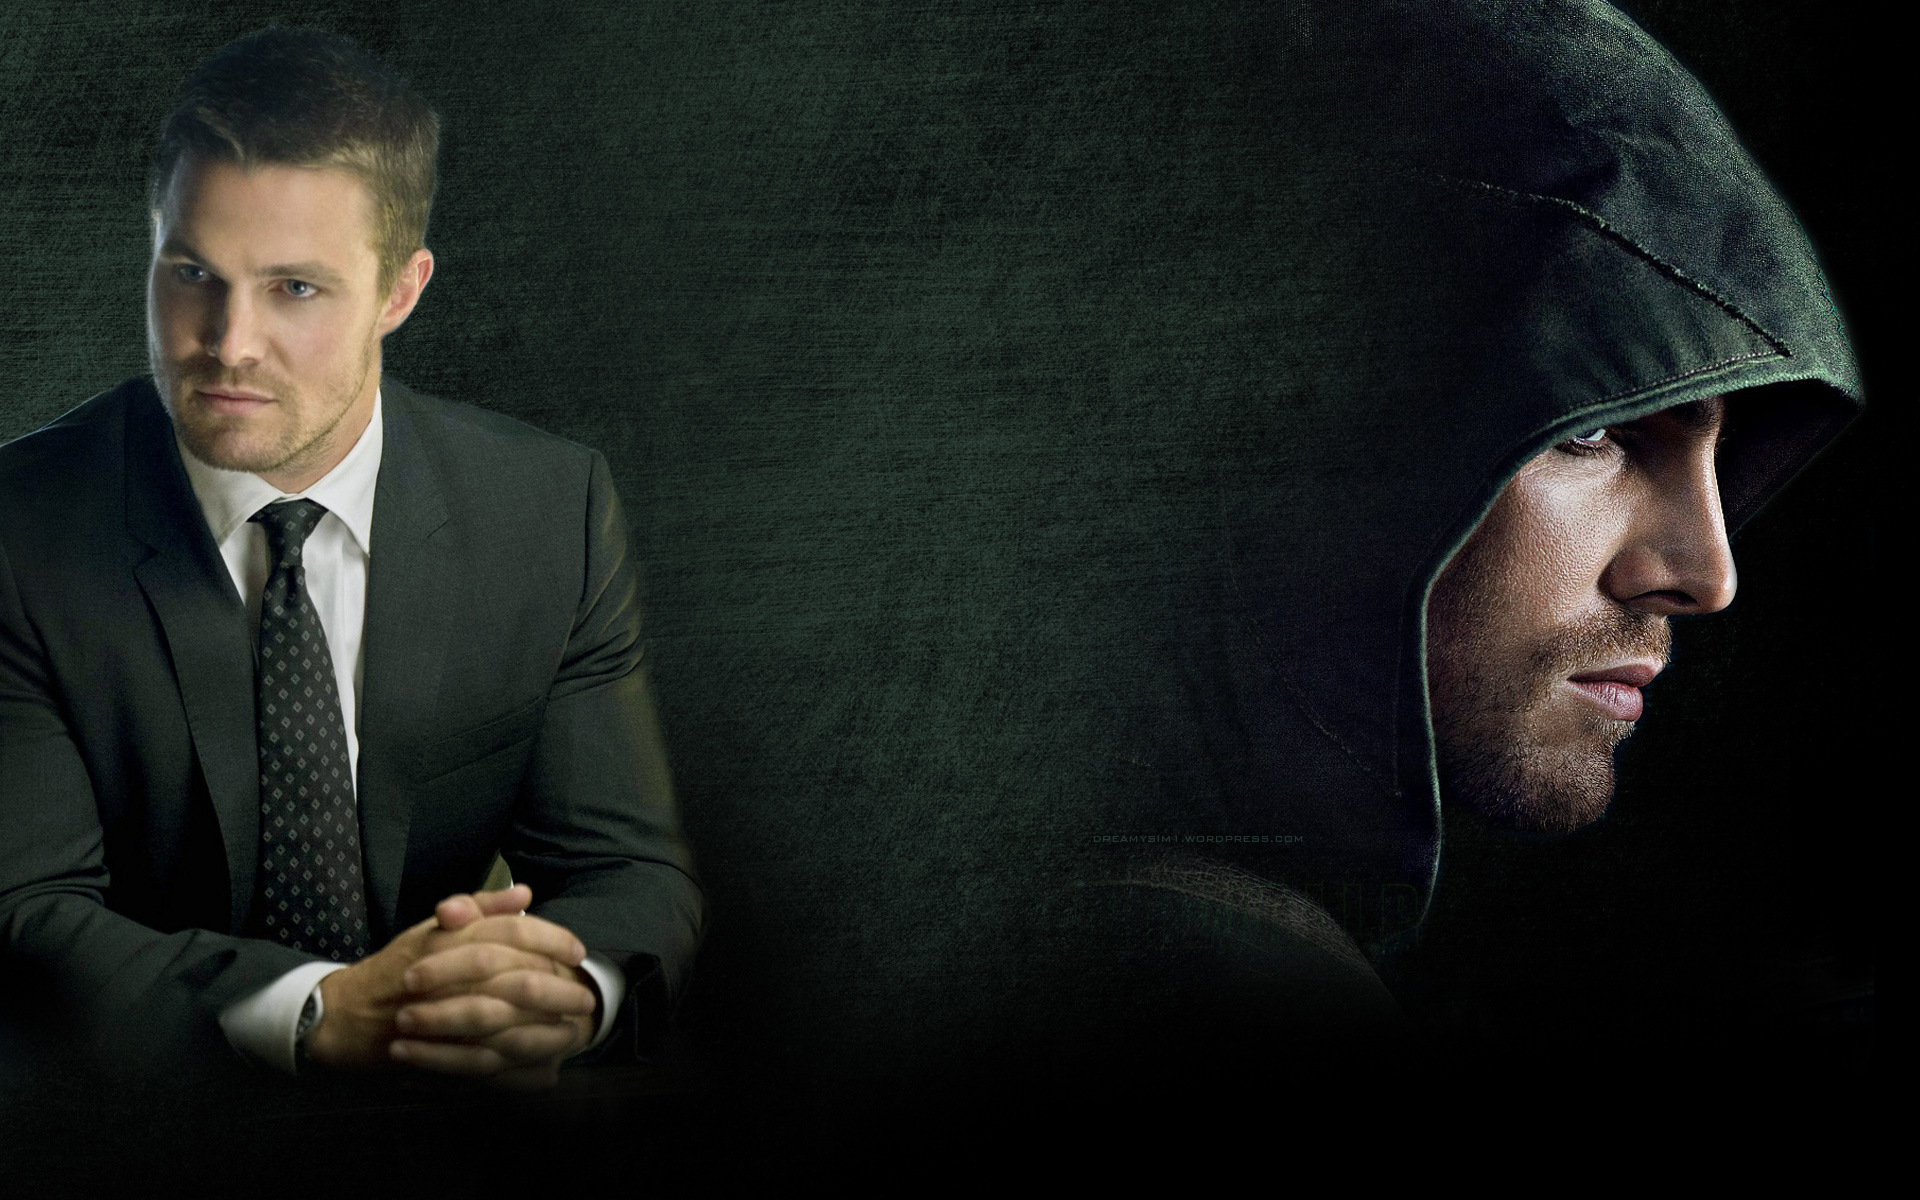 Great New Oliver Queen Wallpapers Made By @DreamySim1 | Amellynation